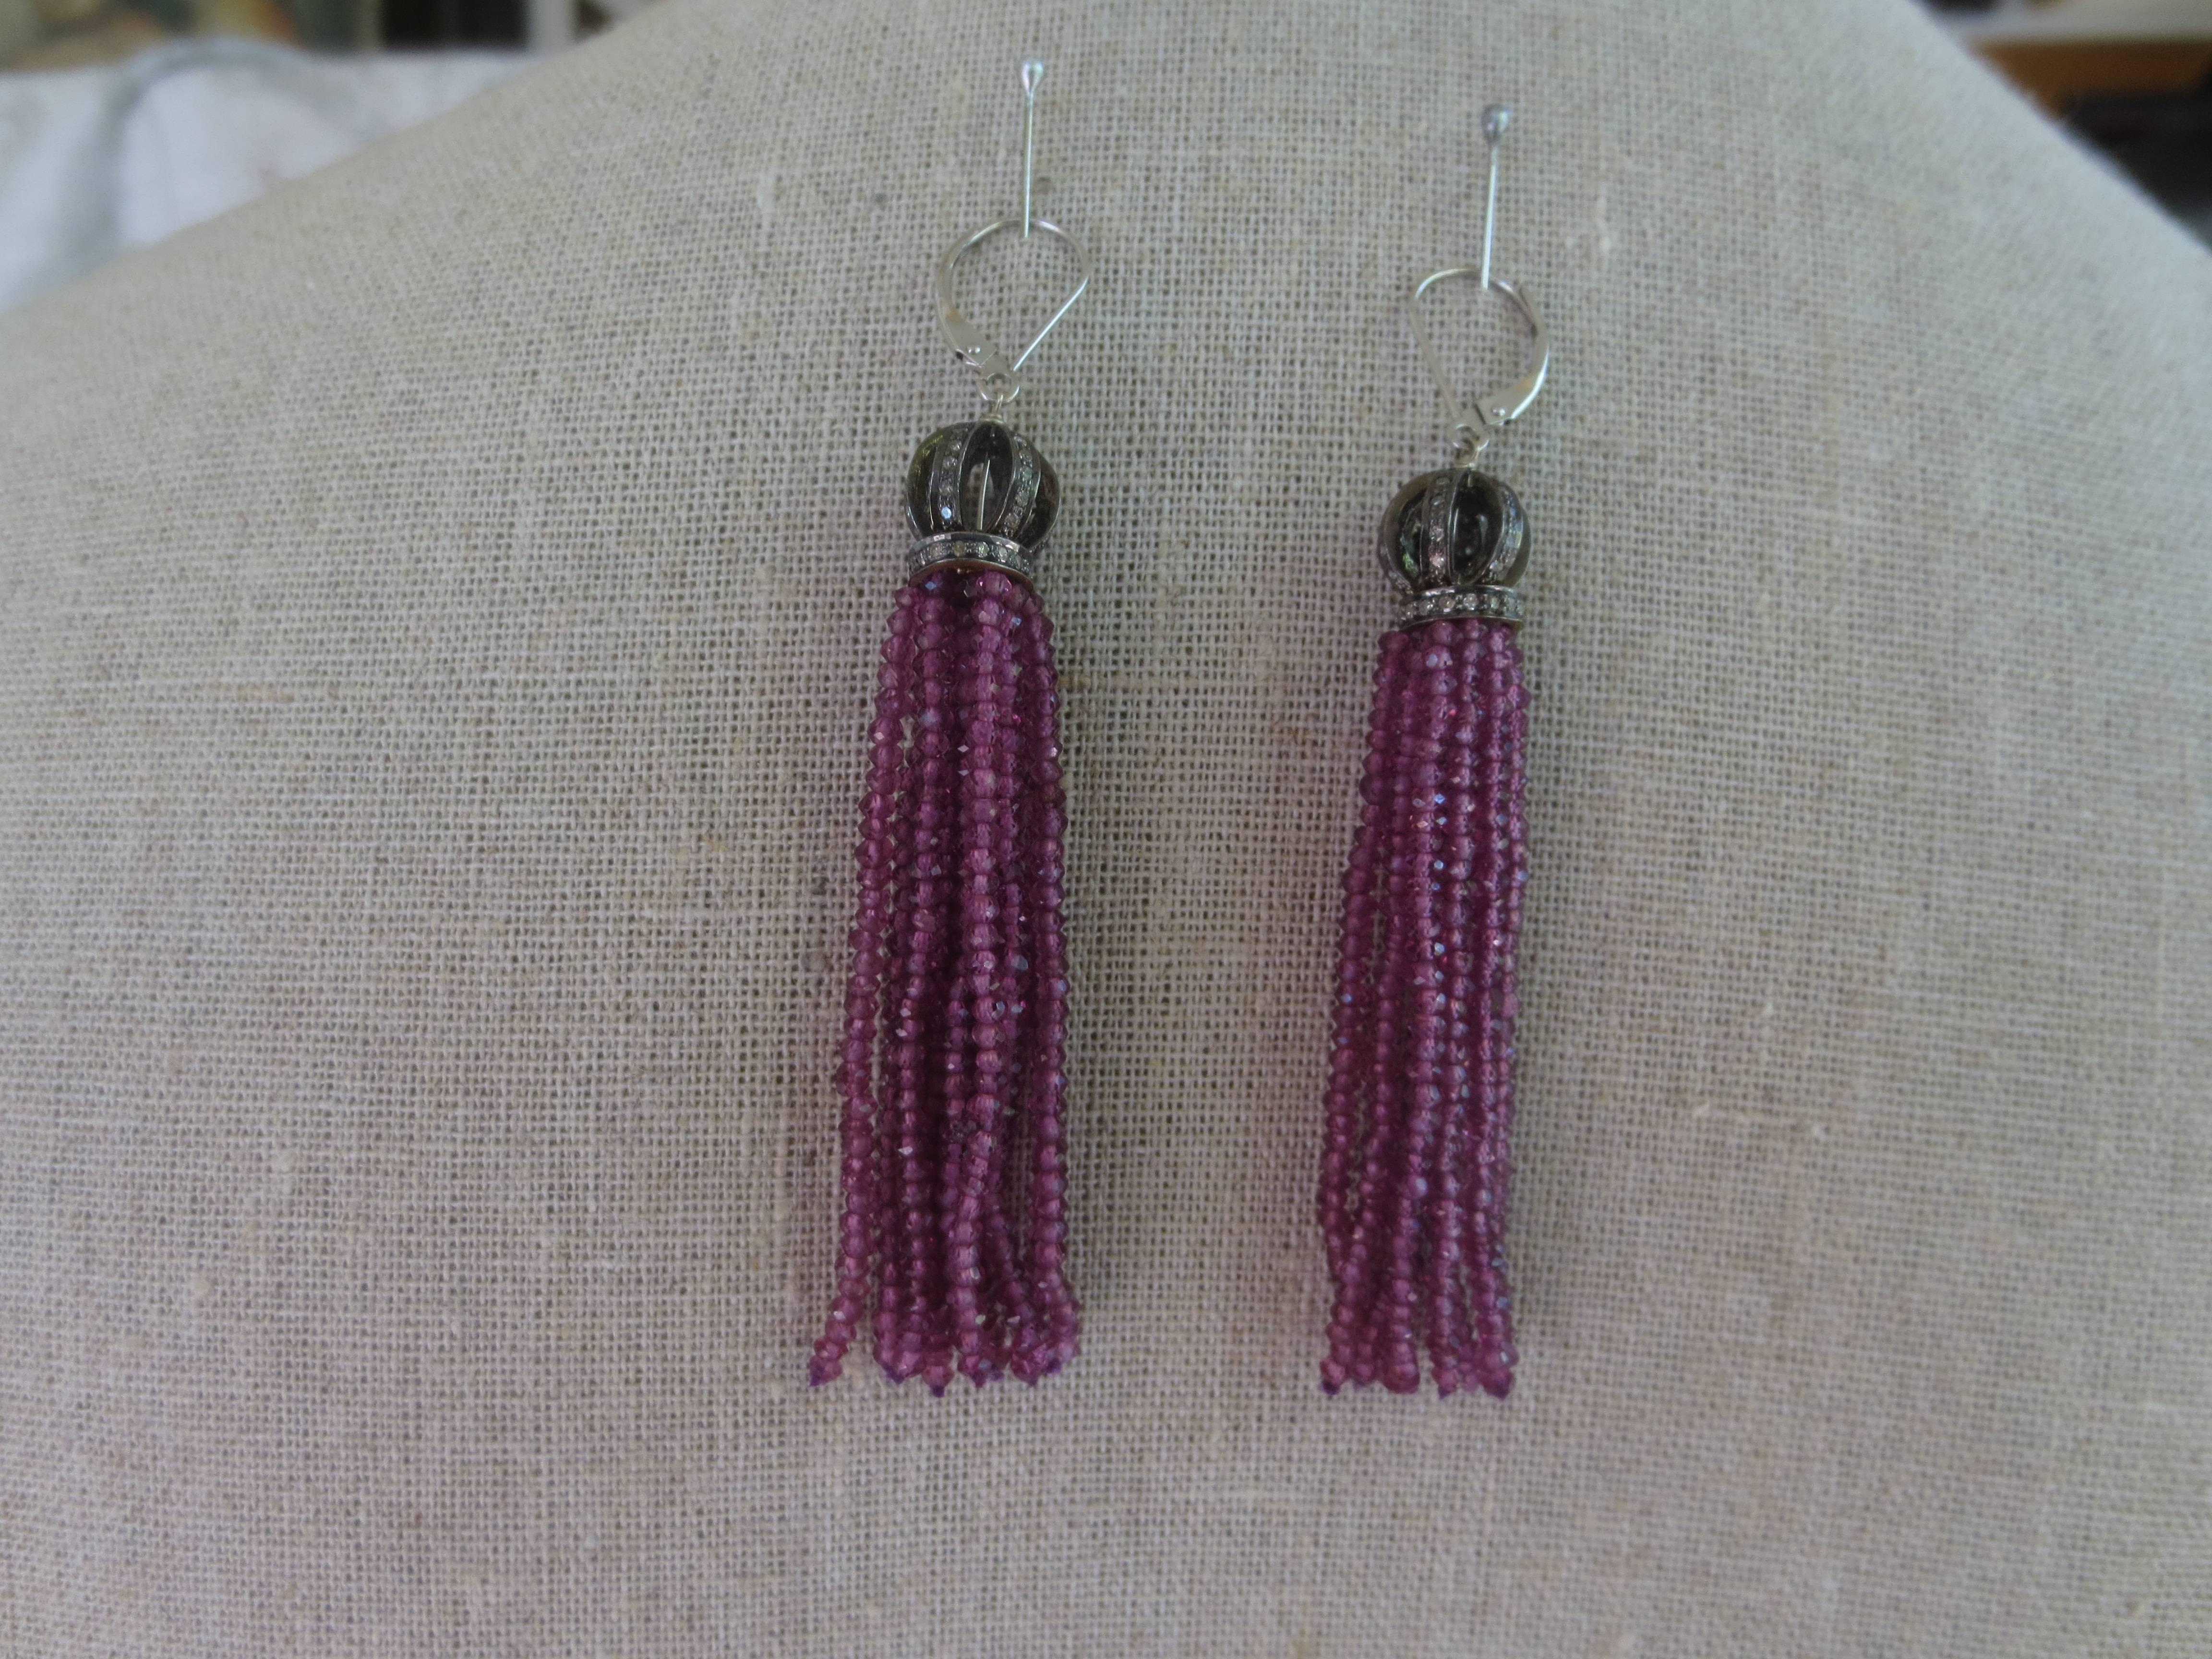 Lovely garnet tassel earrings by Marina J. The tassels are 3 inches long, and emanate from a lovely diamond and silver 